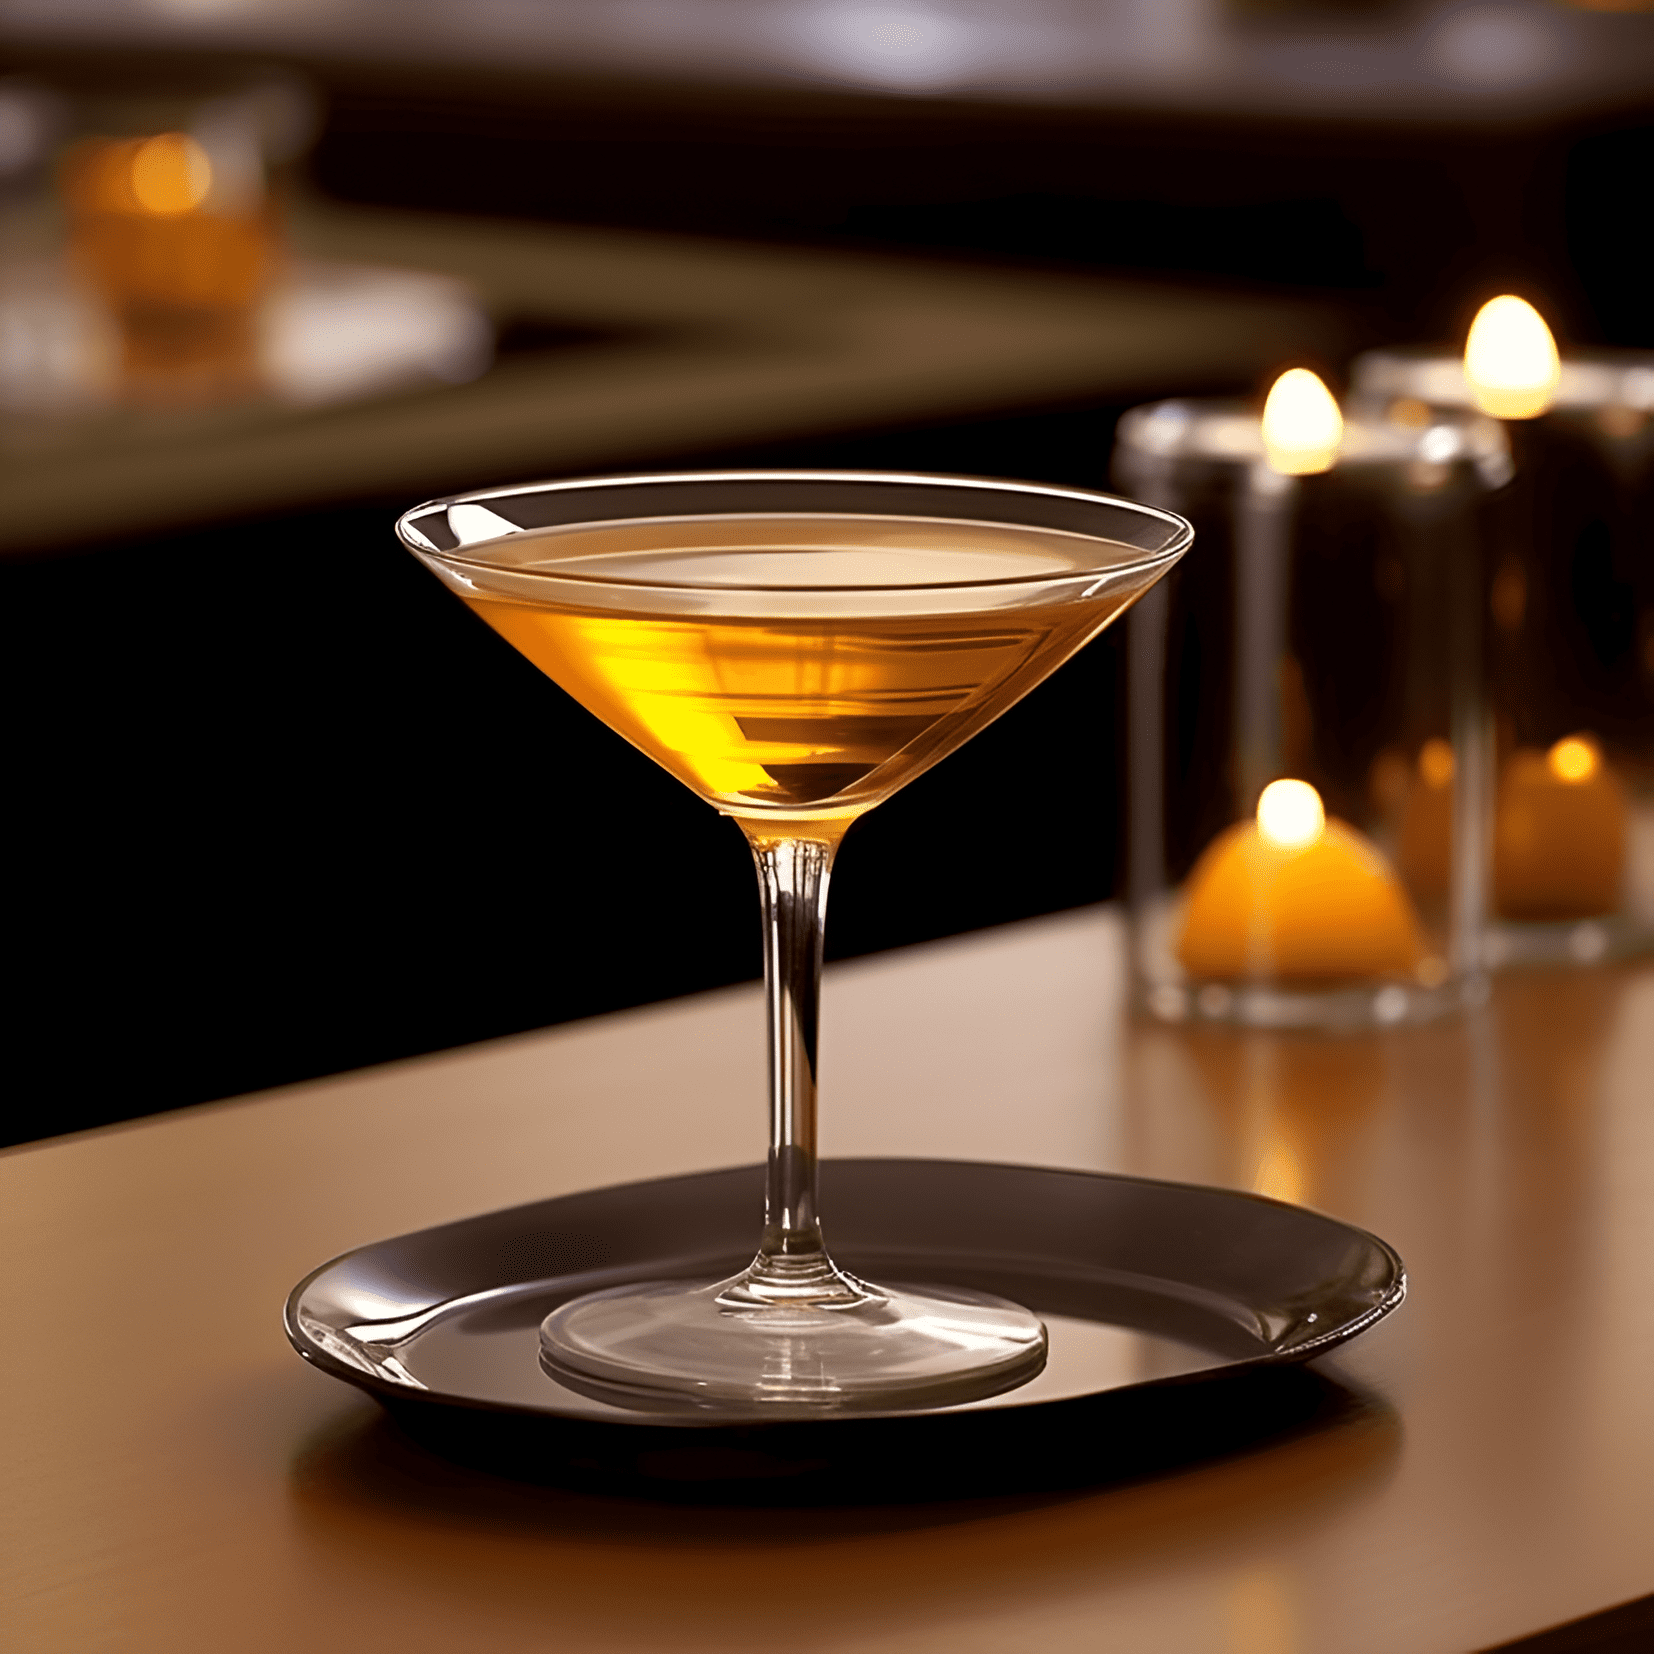 Louisiana Cocktail Recipe - The Louisiana cocktail is a well-balanced mix of sweet, sour, and bitter flavors. It has a smooth, velvety texture with a hint of warmth from the whiskey. The herbal notes from the vermouth and the bitters add complexity to the drink, making it a sophisticated and enjoyable sip.